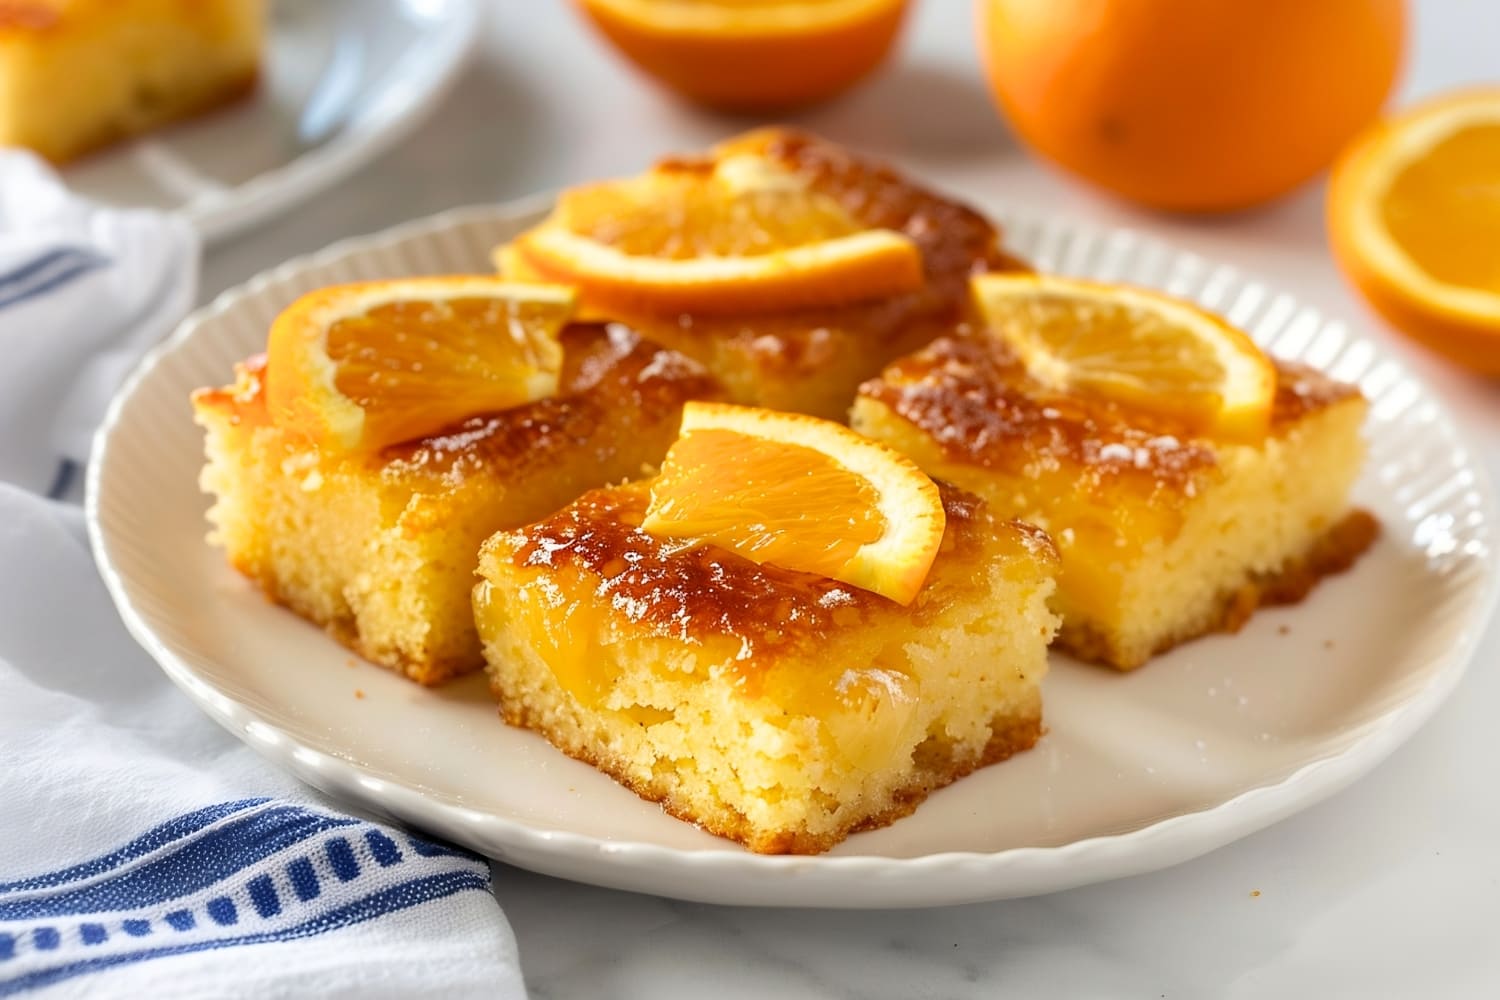 Close-up of a decadent slice of Greek orange cake, showcasing its moist crumb and citrus-infused aroma.